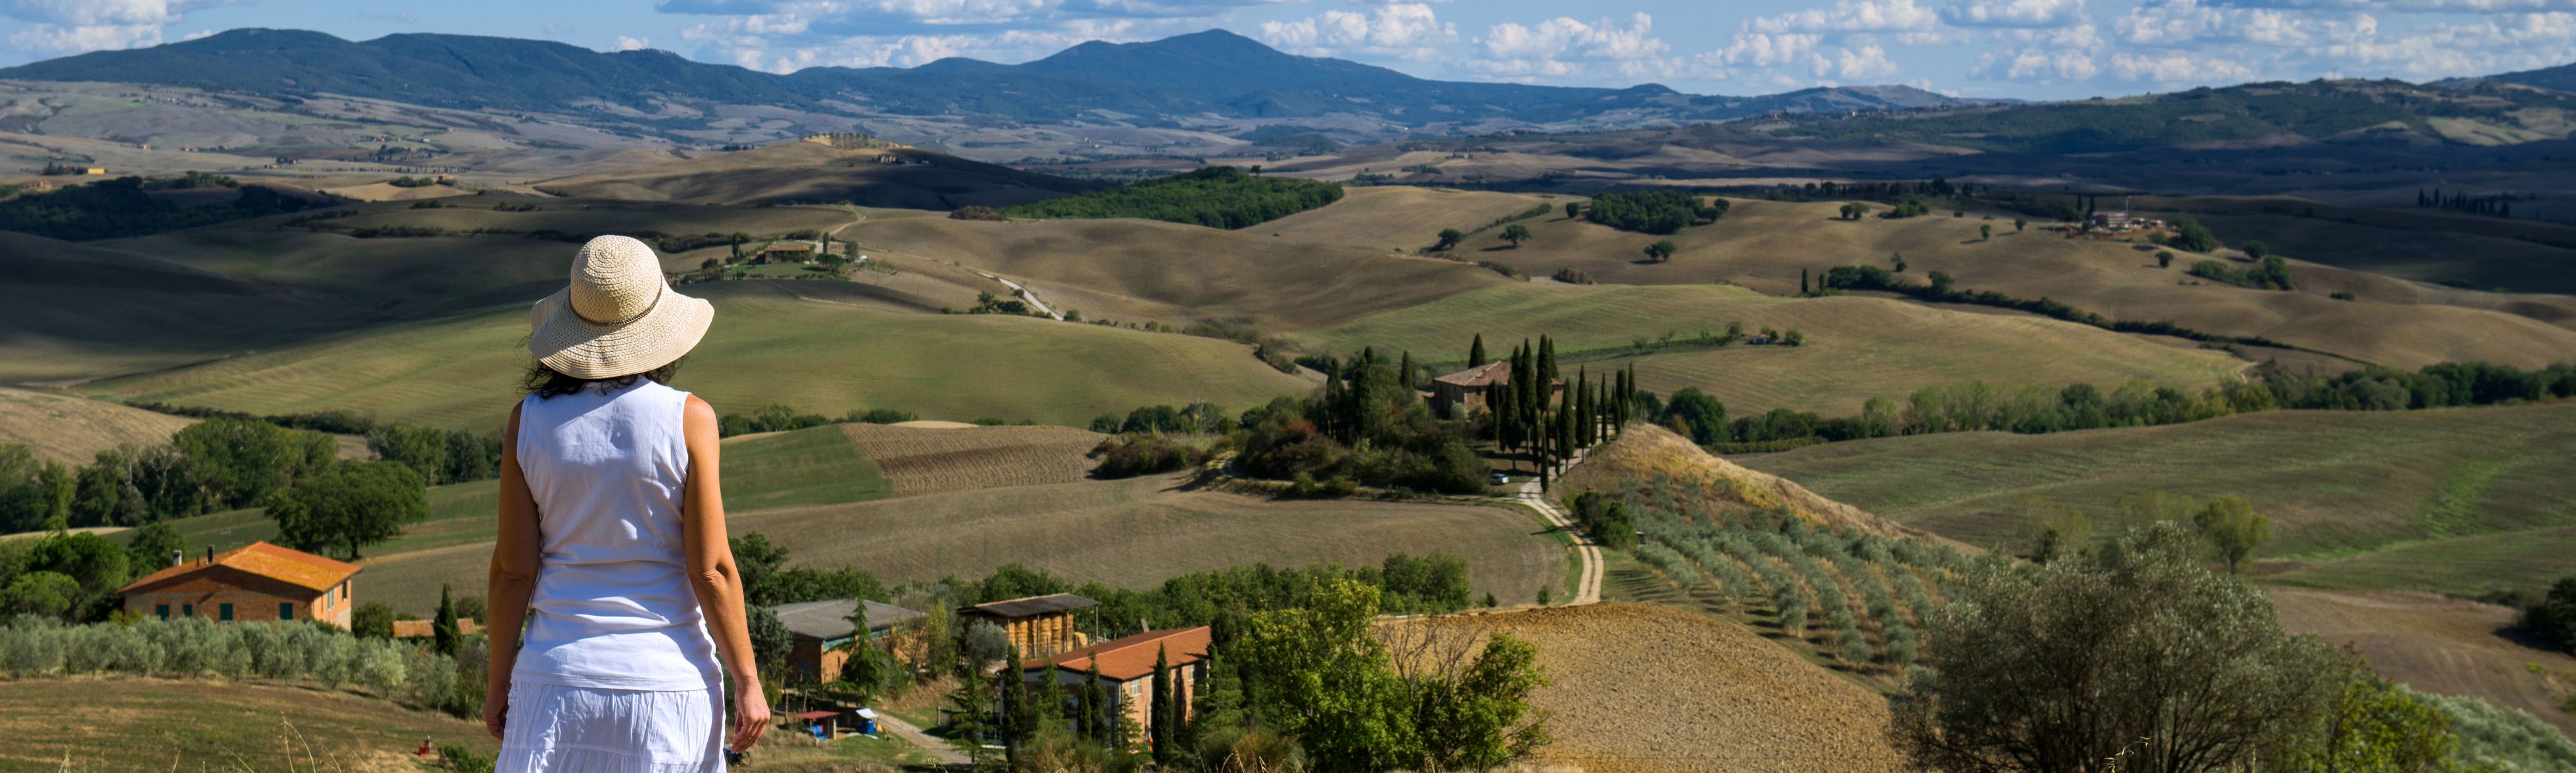 Top 5 Villages To Visit In Tuscany Ef Go Ahead Tours 0376